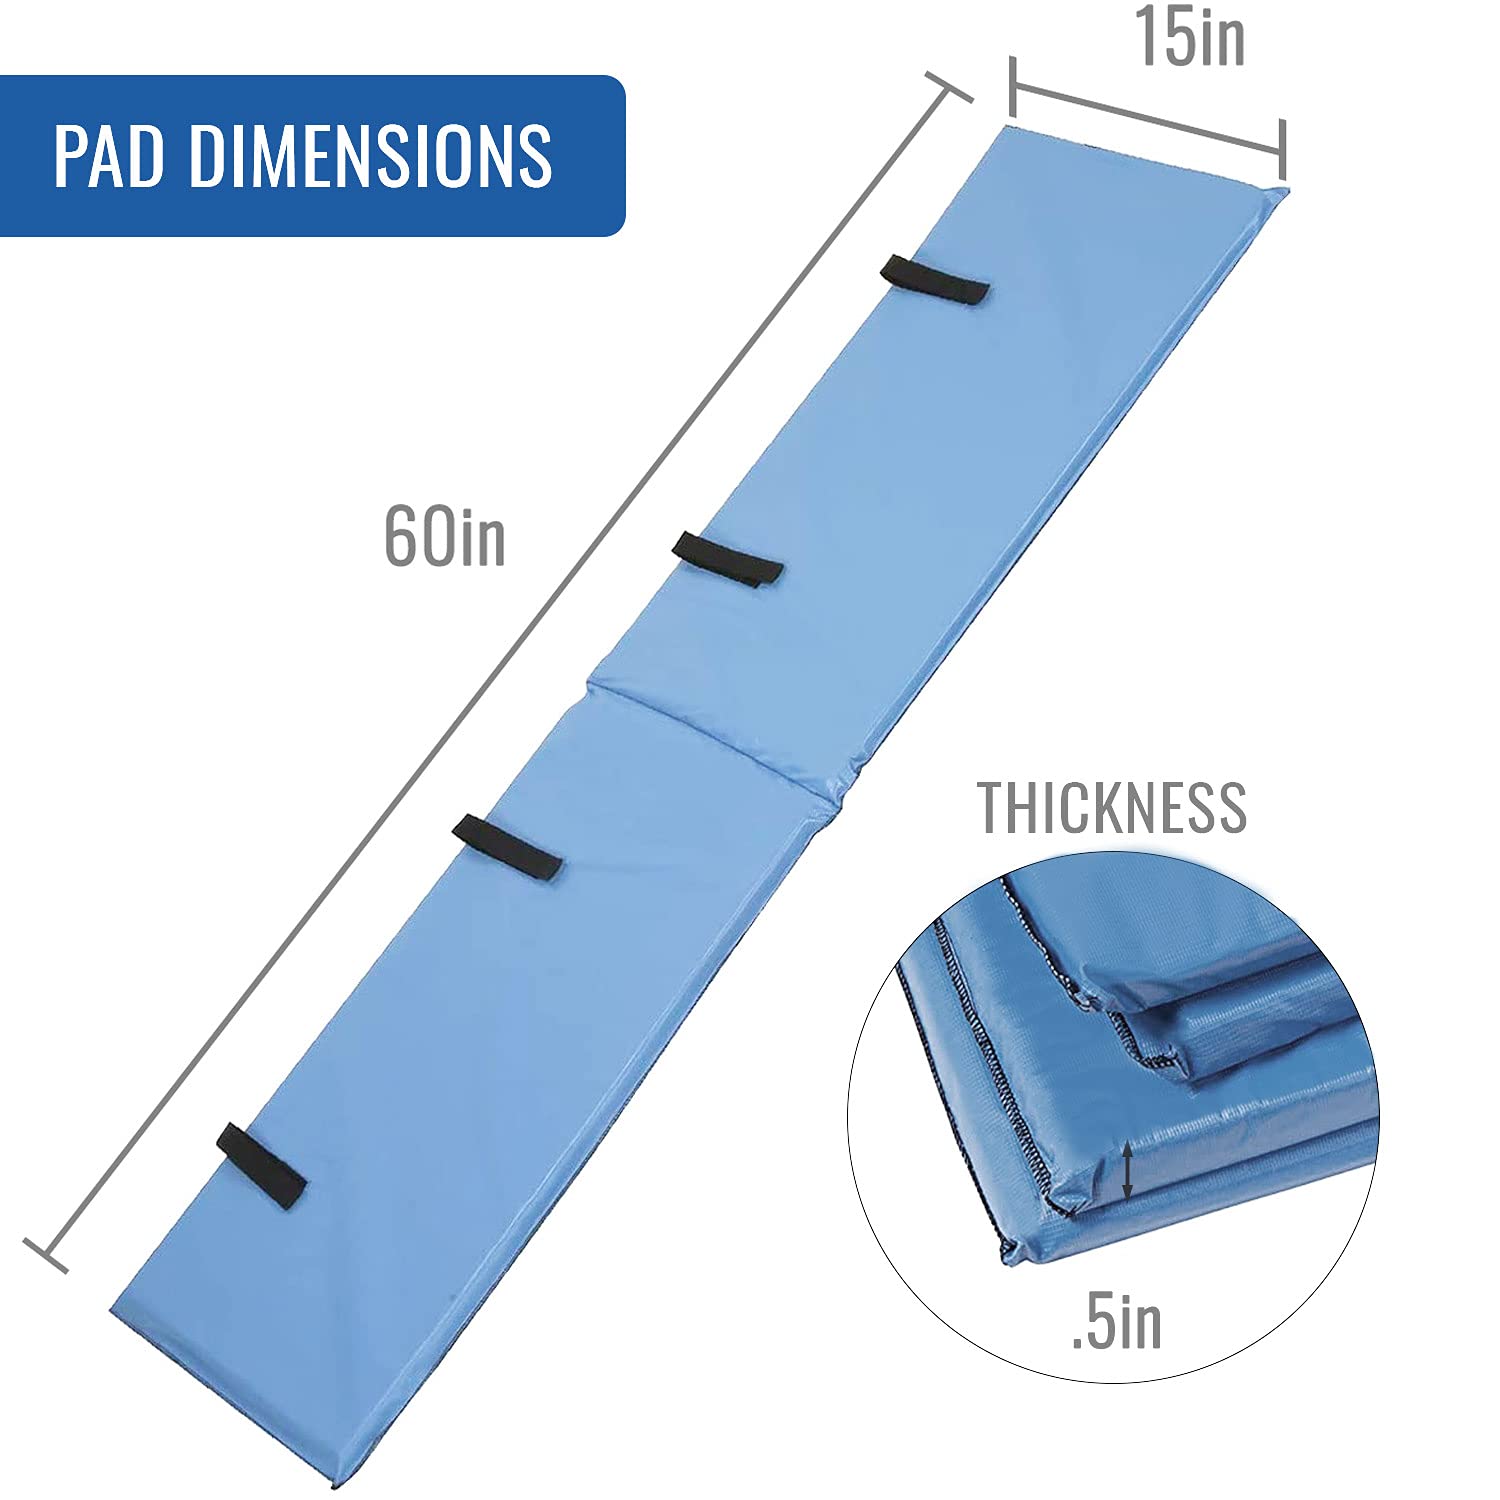 DMI Bed Rail Cover, Bed Rail Padding and Bed Bumper Pad for Toddlers, Elderly, Disabled or Handicapped, Rails Not included, Padded Cover Only, Blue, 60 x 15 x 0.5, 2 Count